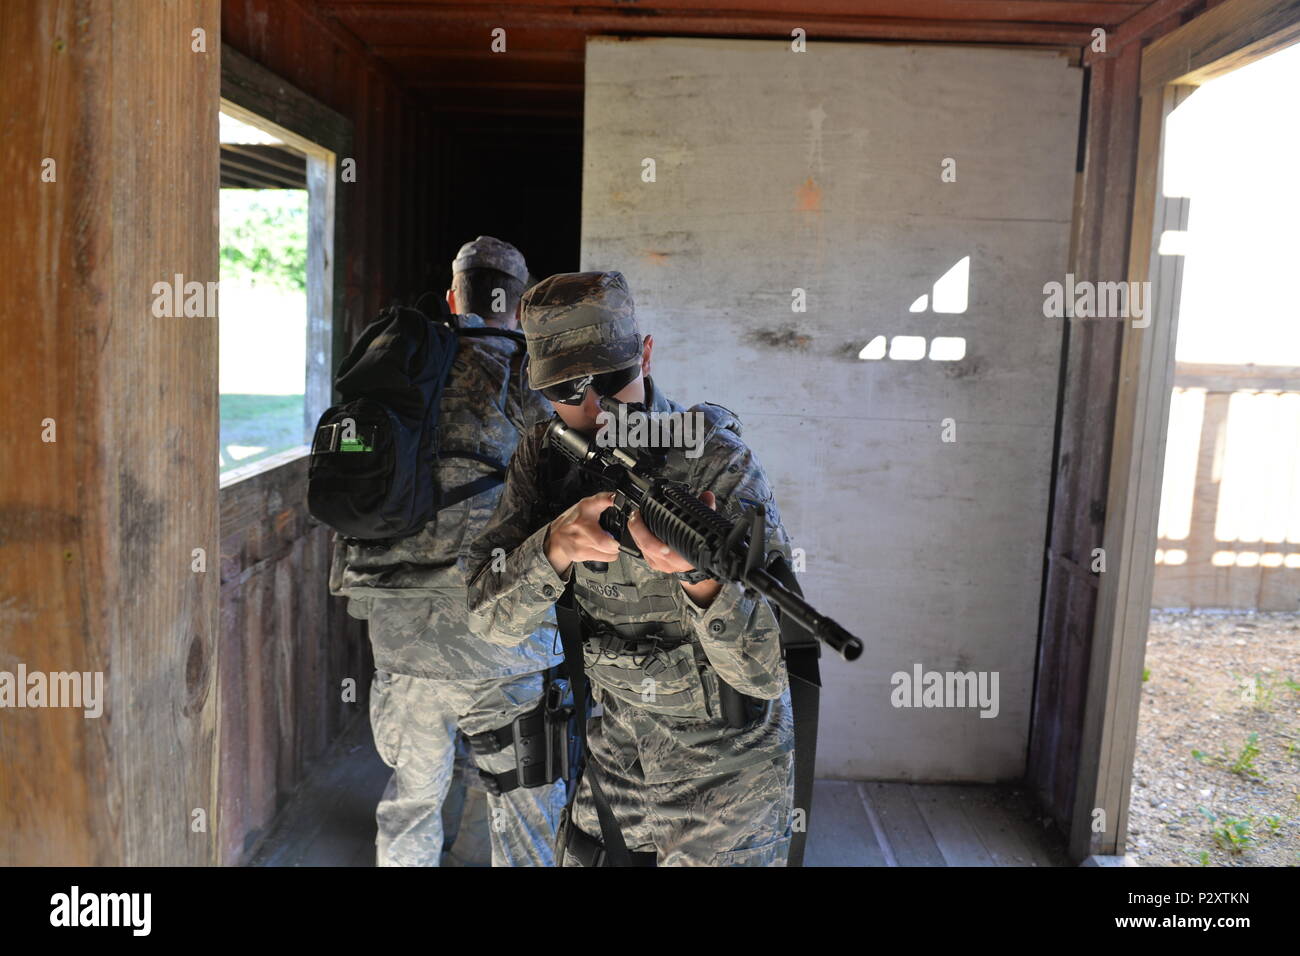 U.S. Air Force Airman 1st Class Dalton Briggs, and his partner Staff Sgt. Michael Hanes, both with the 157th Security Forces Squadron, New Hampshire Air National Guard, clear a room during skills training, Aug. 3, 2016, at the New Hampshire National Guard Training Site, Center Strafford, N.H. (Air National Photo by Airman 1st Class Ashlyn J. Correia) Stock Photo